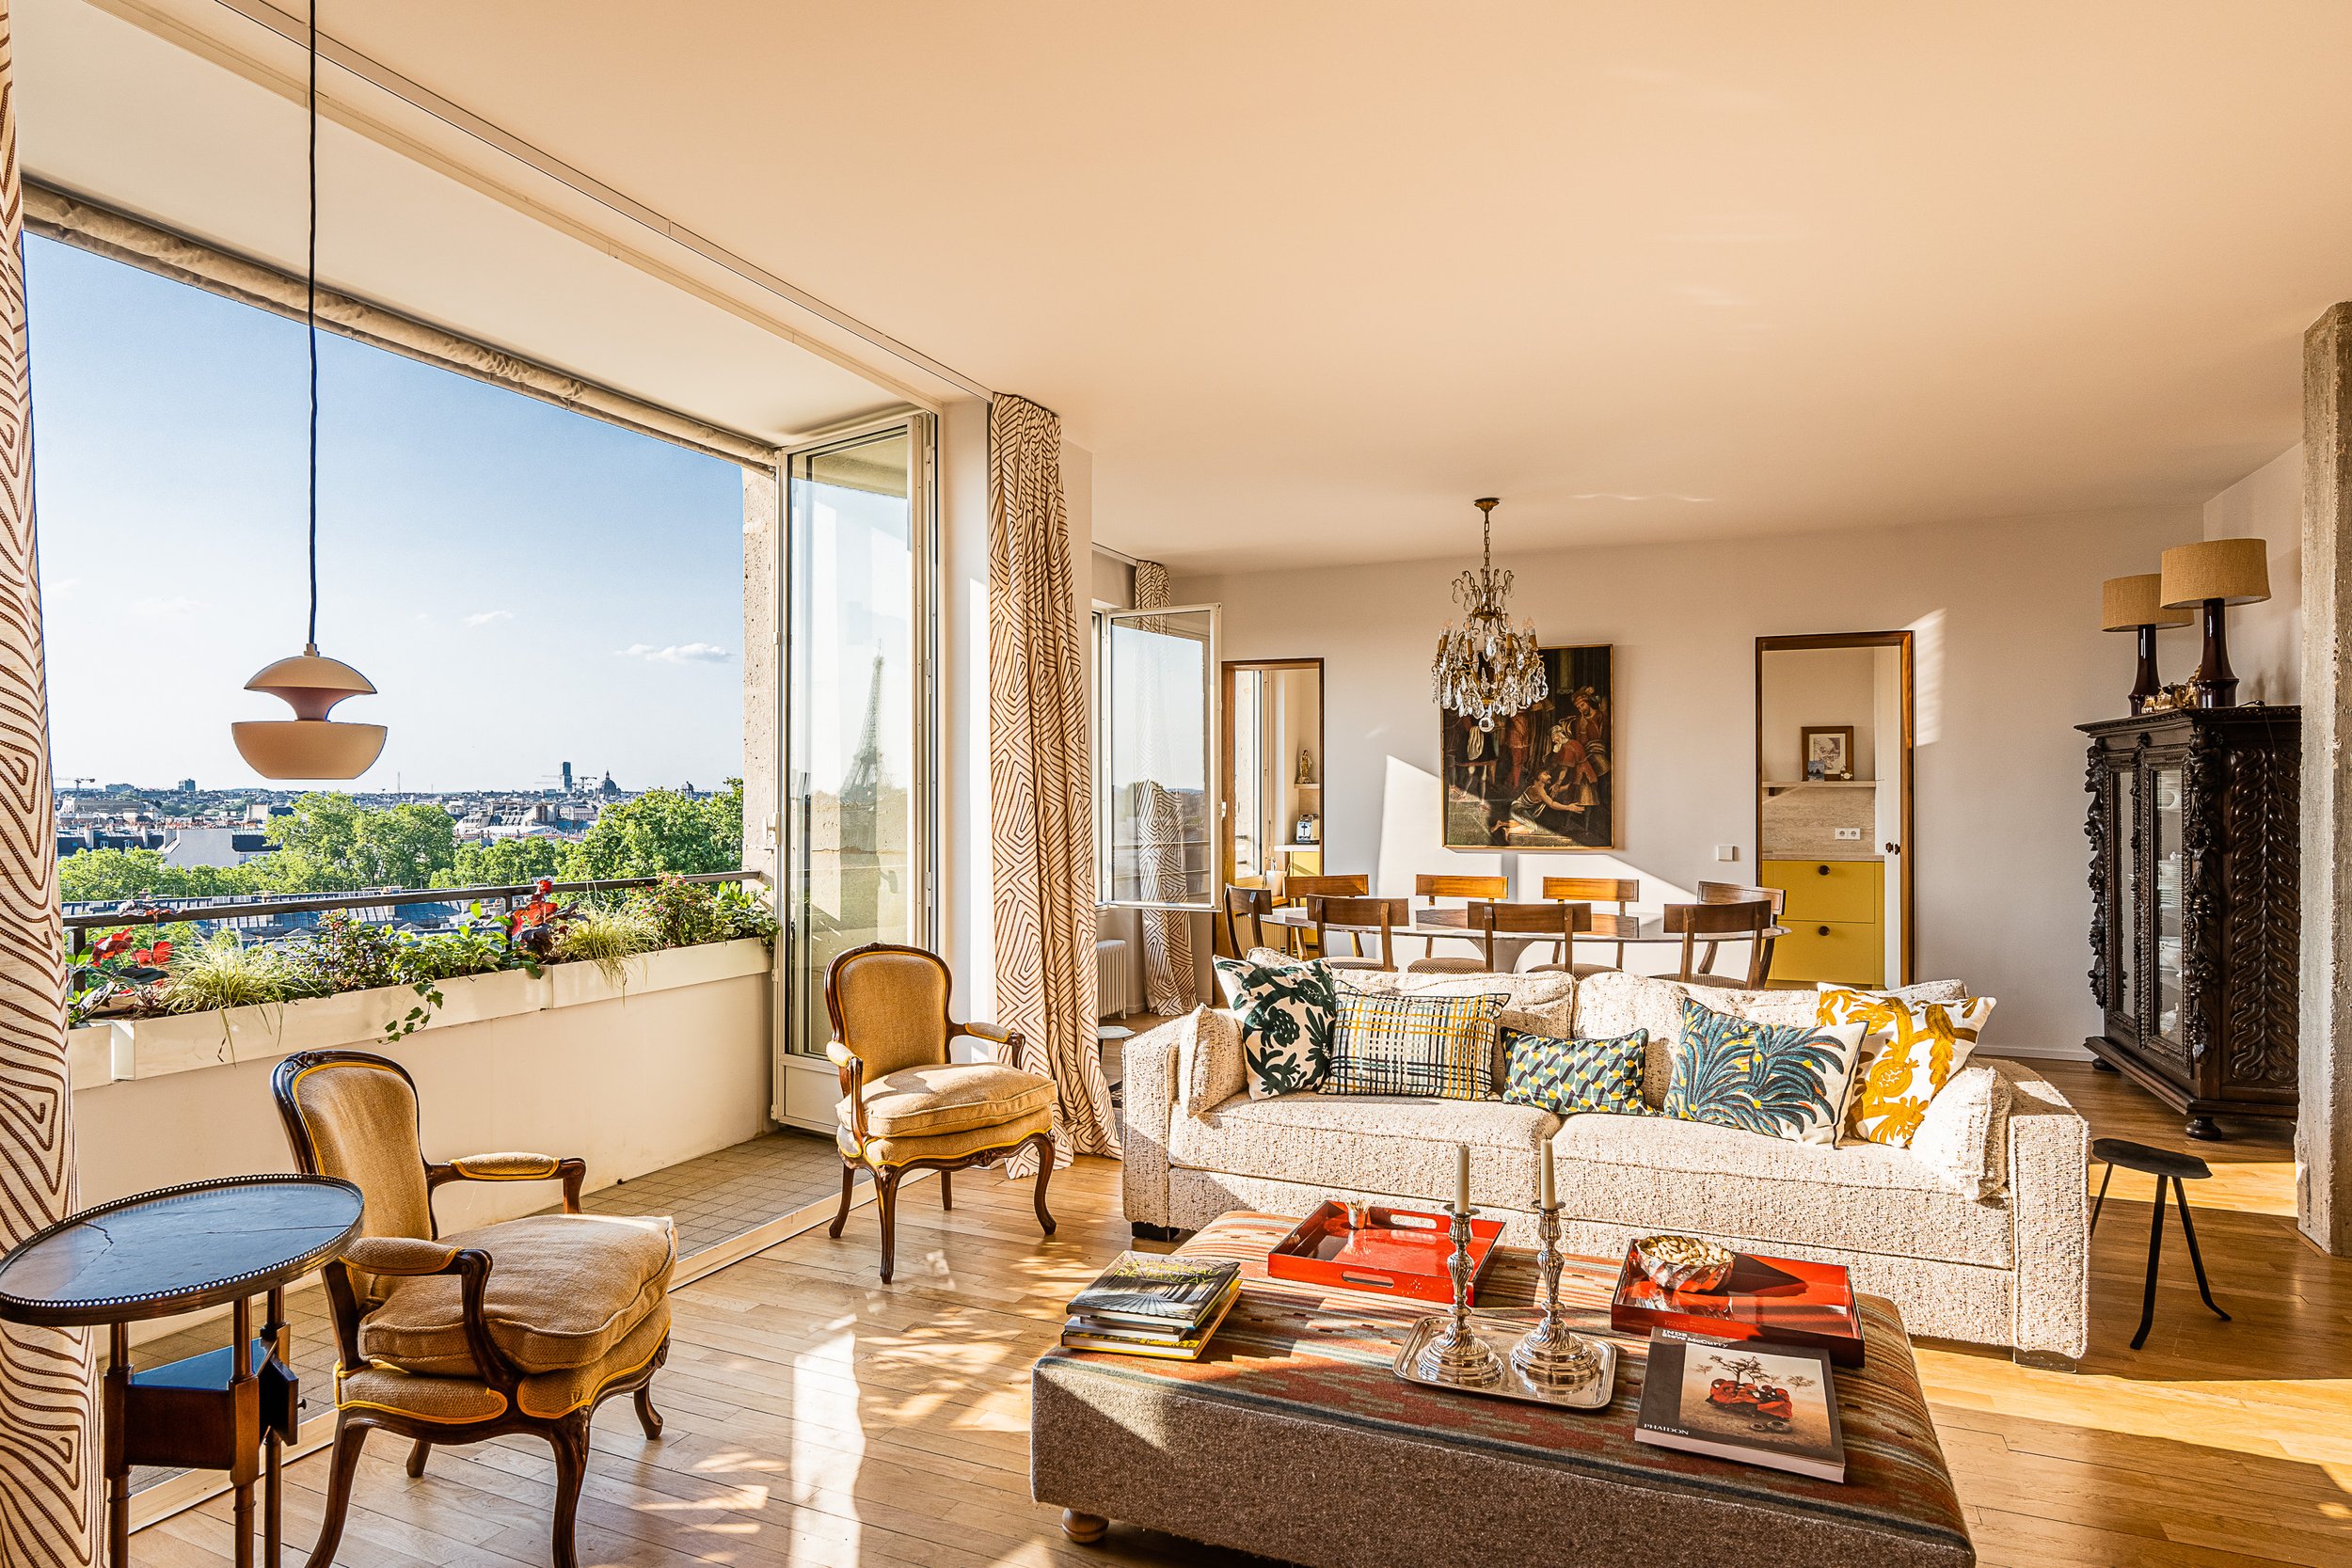 Prestigious apartment and rooftop in the heart of Paris and Saint Germain des Prés overlooking the Eiffel Tower